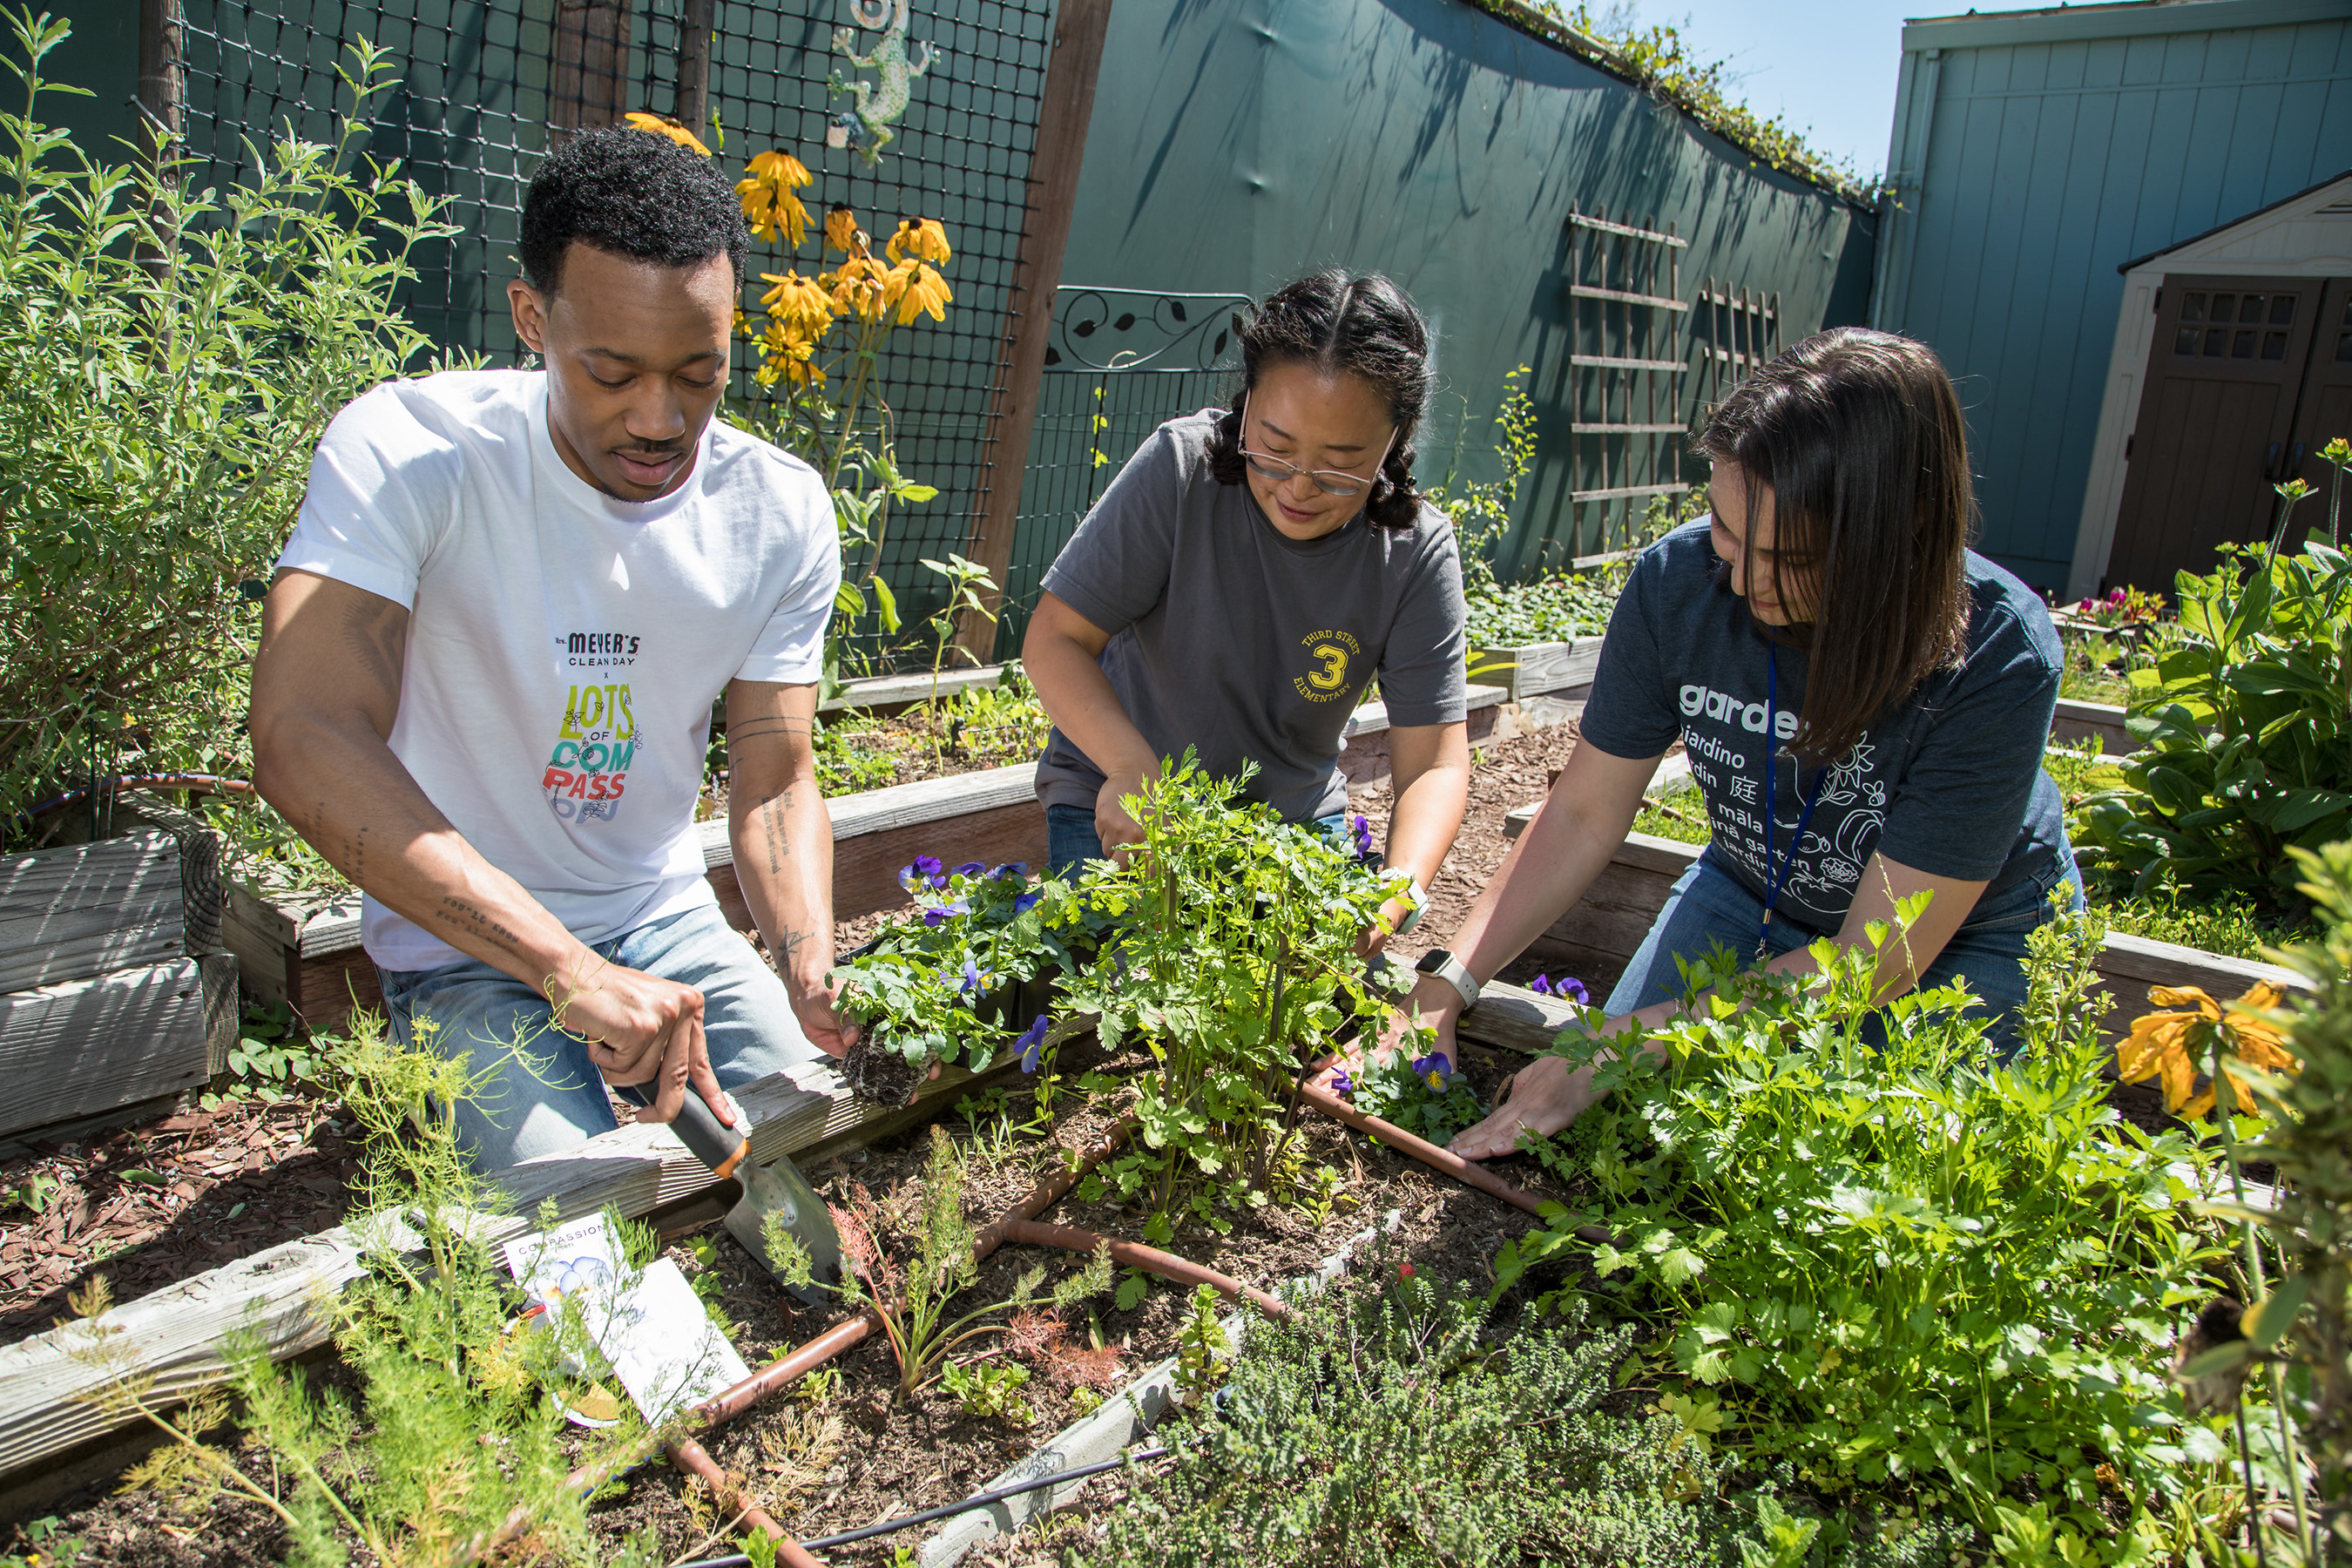 Tyler James Williams joined others inspired by the garden to help Mrs. Meyer’s Clean Day launch its new Lots of Compassion initiative using the garden to inspire people to plant seeds of kindness in their own communities.